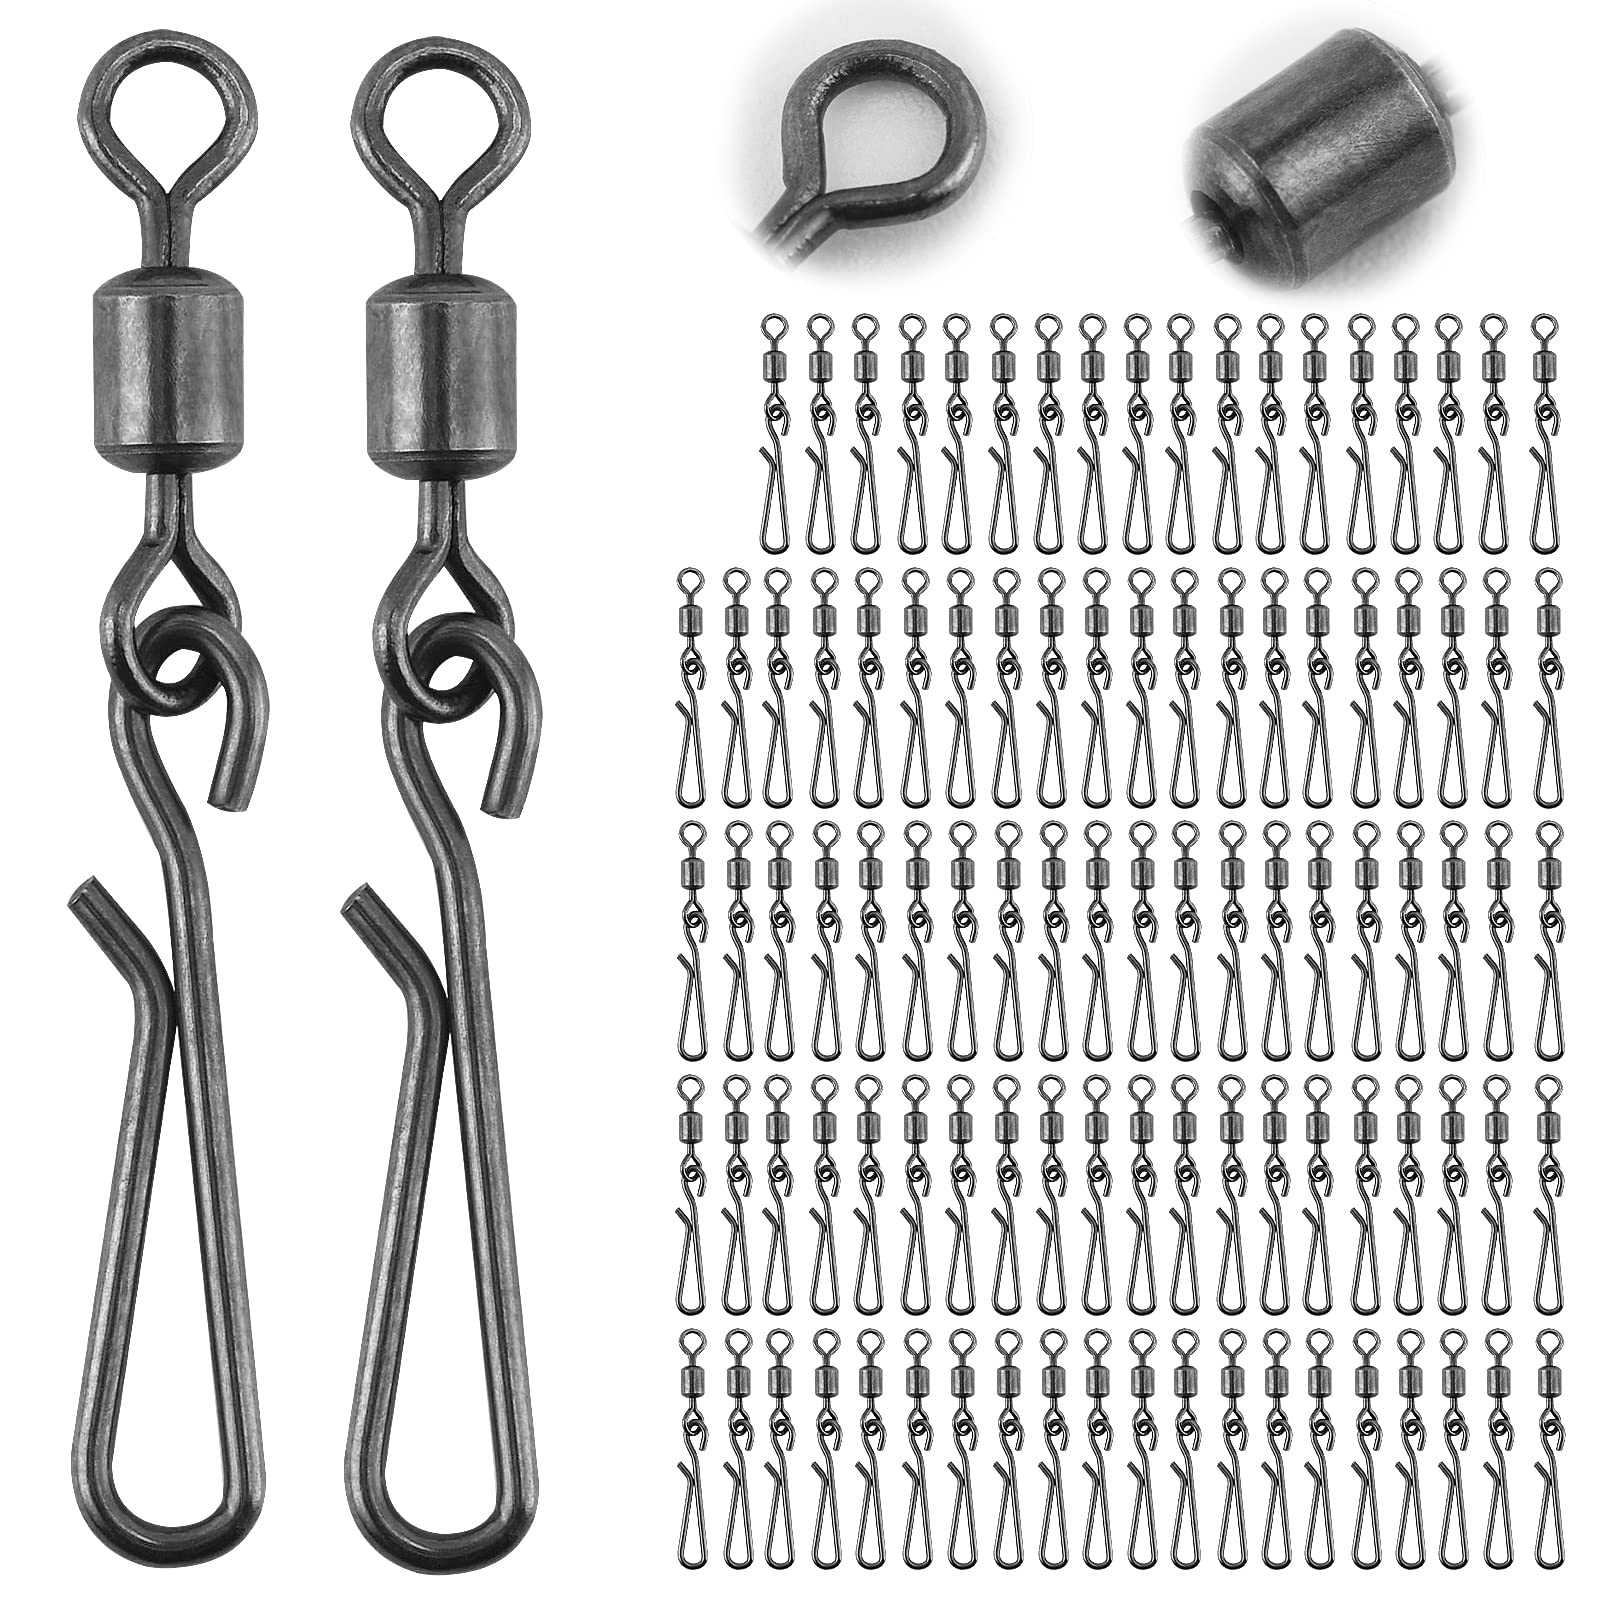 Goture Fishing Swivels, 100pcs Snap Swivels Fishing Tackle, Fishing Swivel Snap  Clips Stainless Steel Quick Lock Hook Line Conne